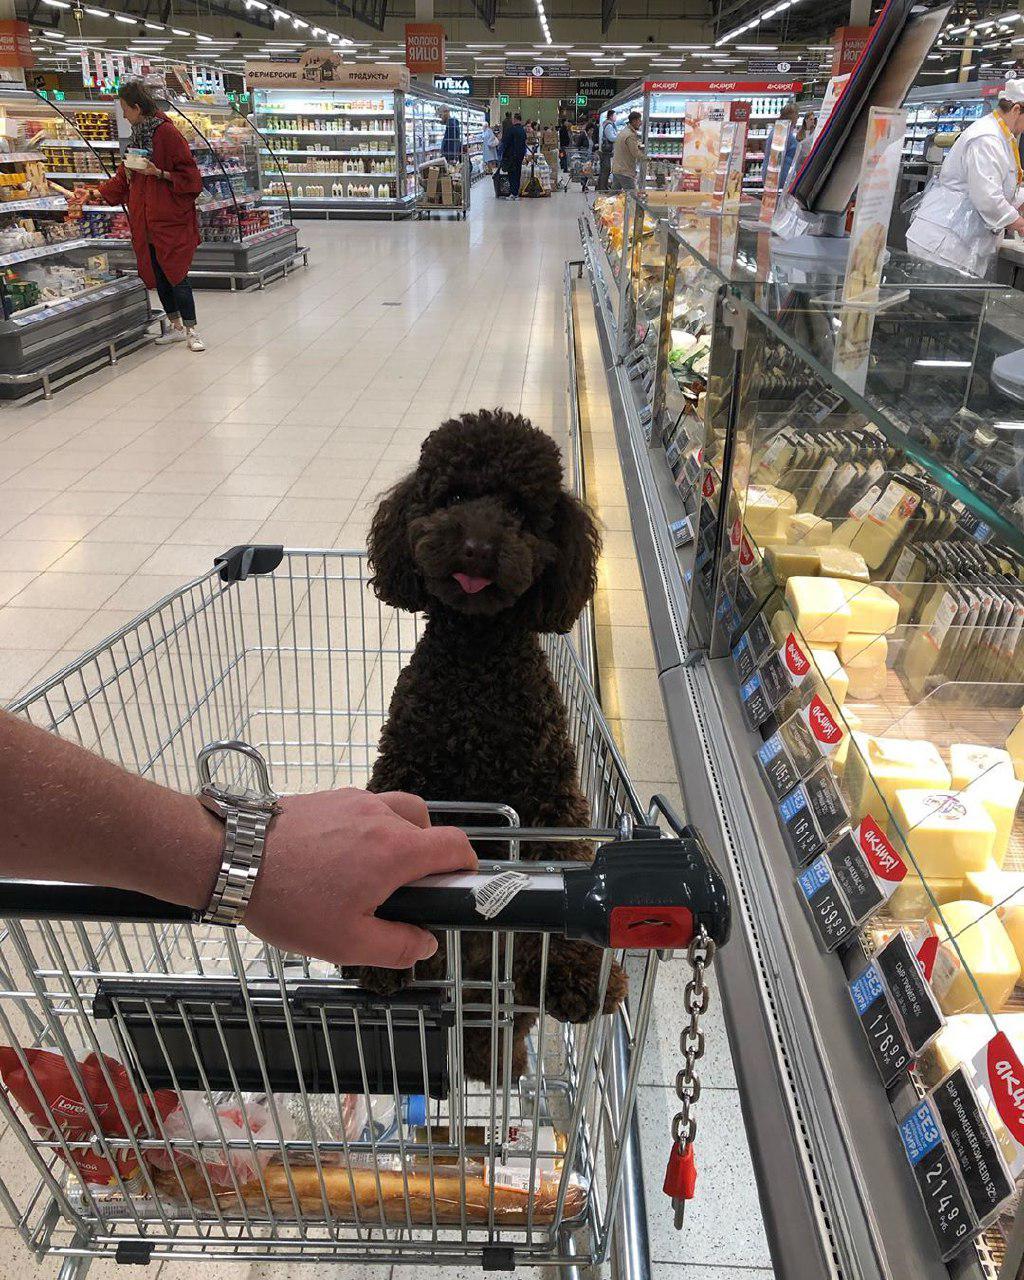 A brown Poodle puppy sitting inside the push cart in the grocery store